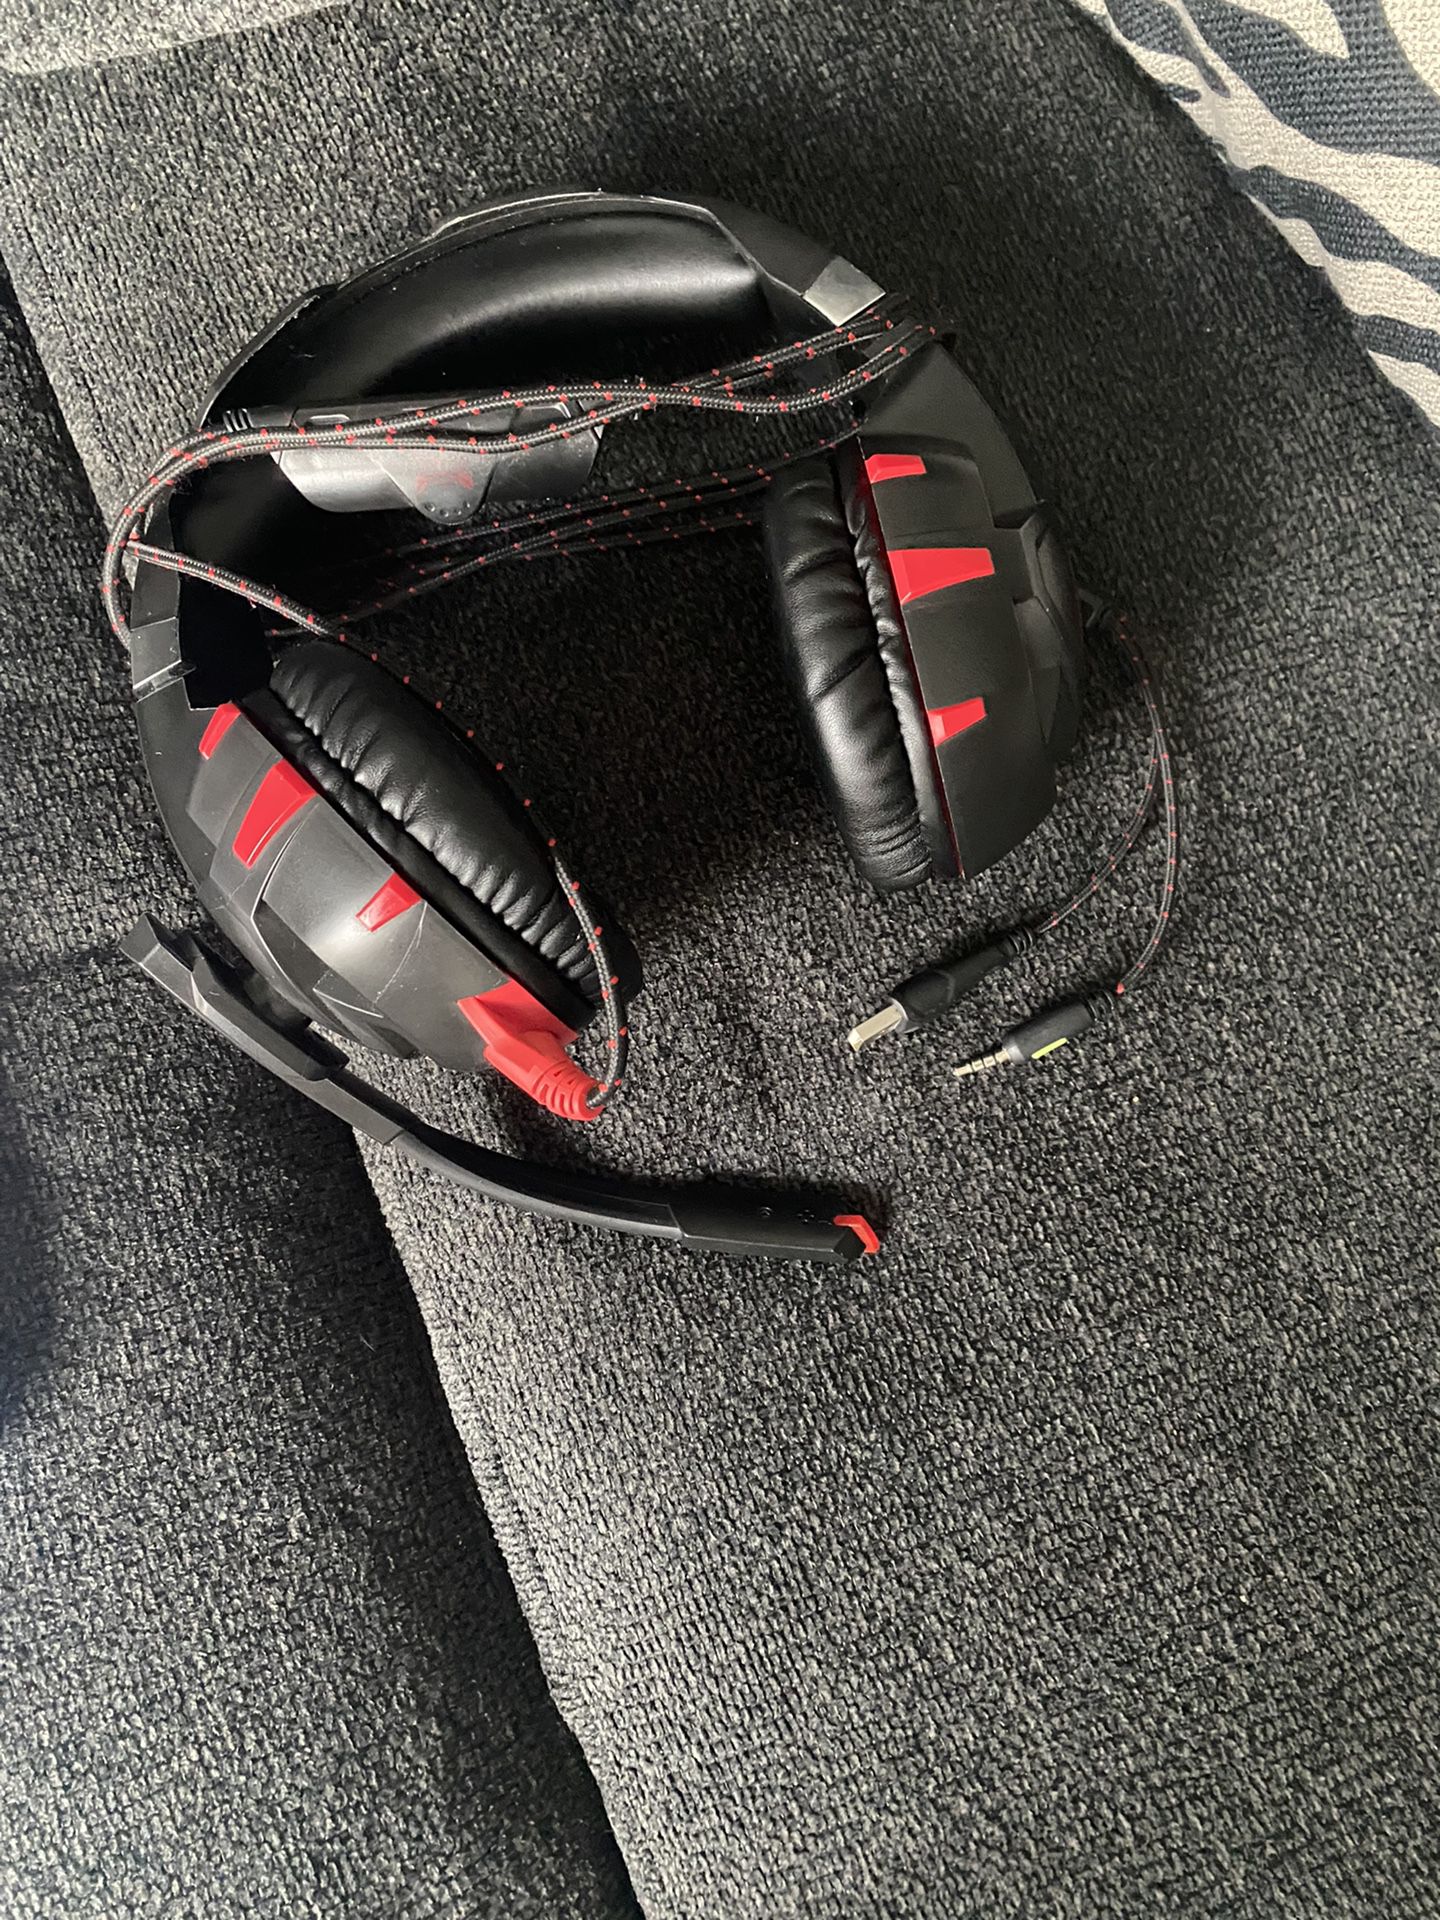 Black And Red headphone With Mic For Any System 